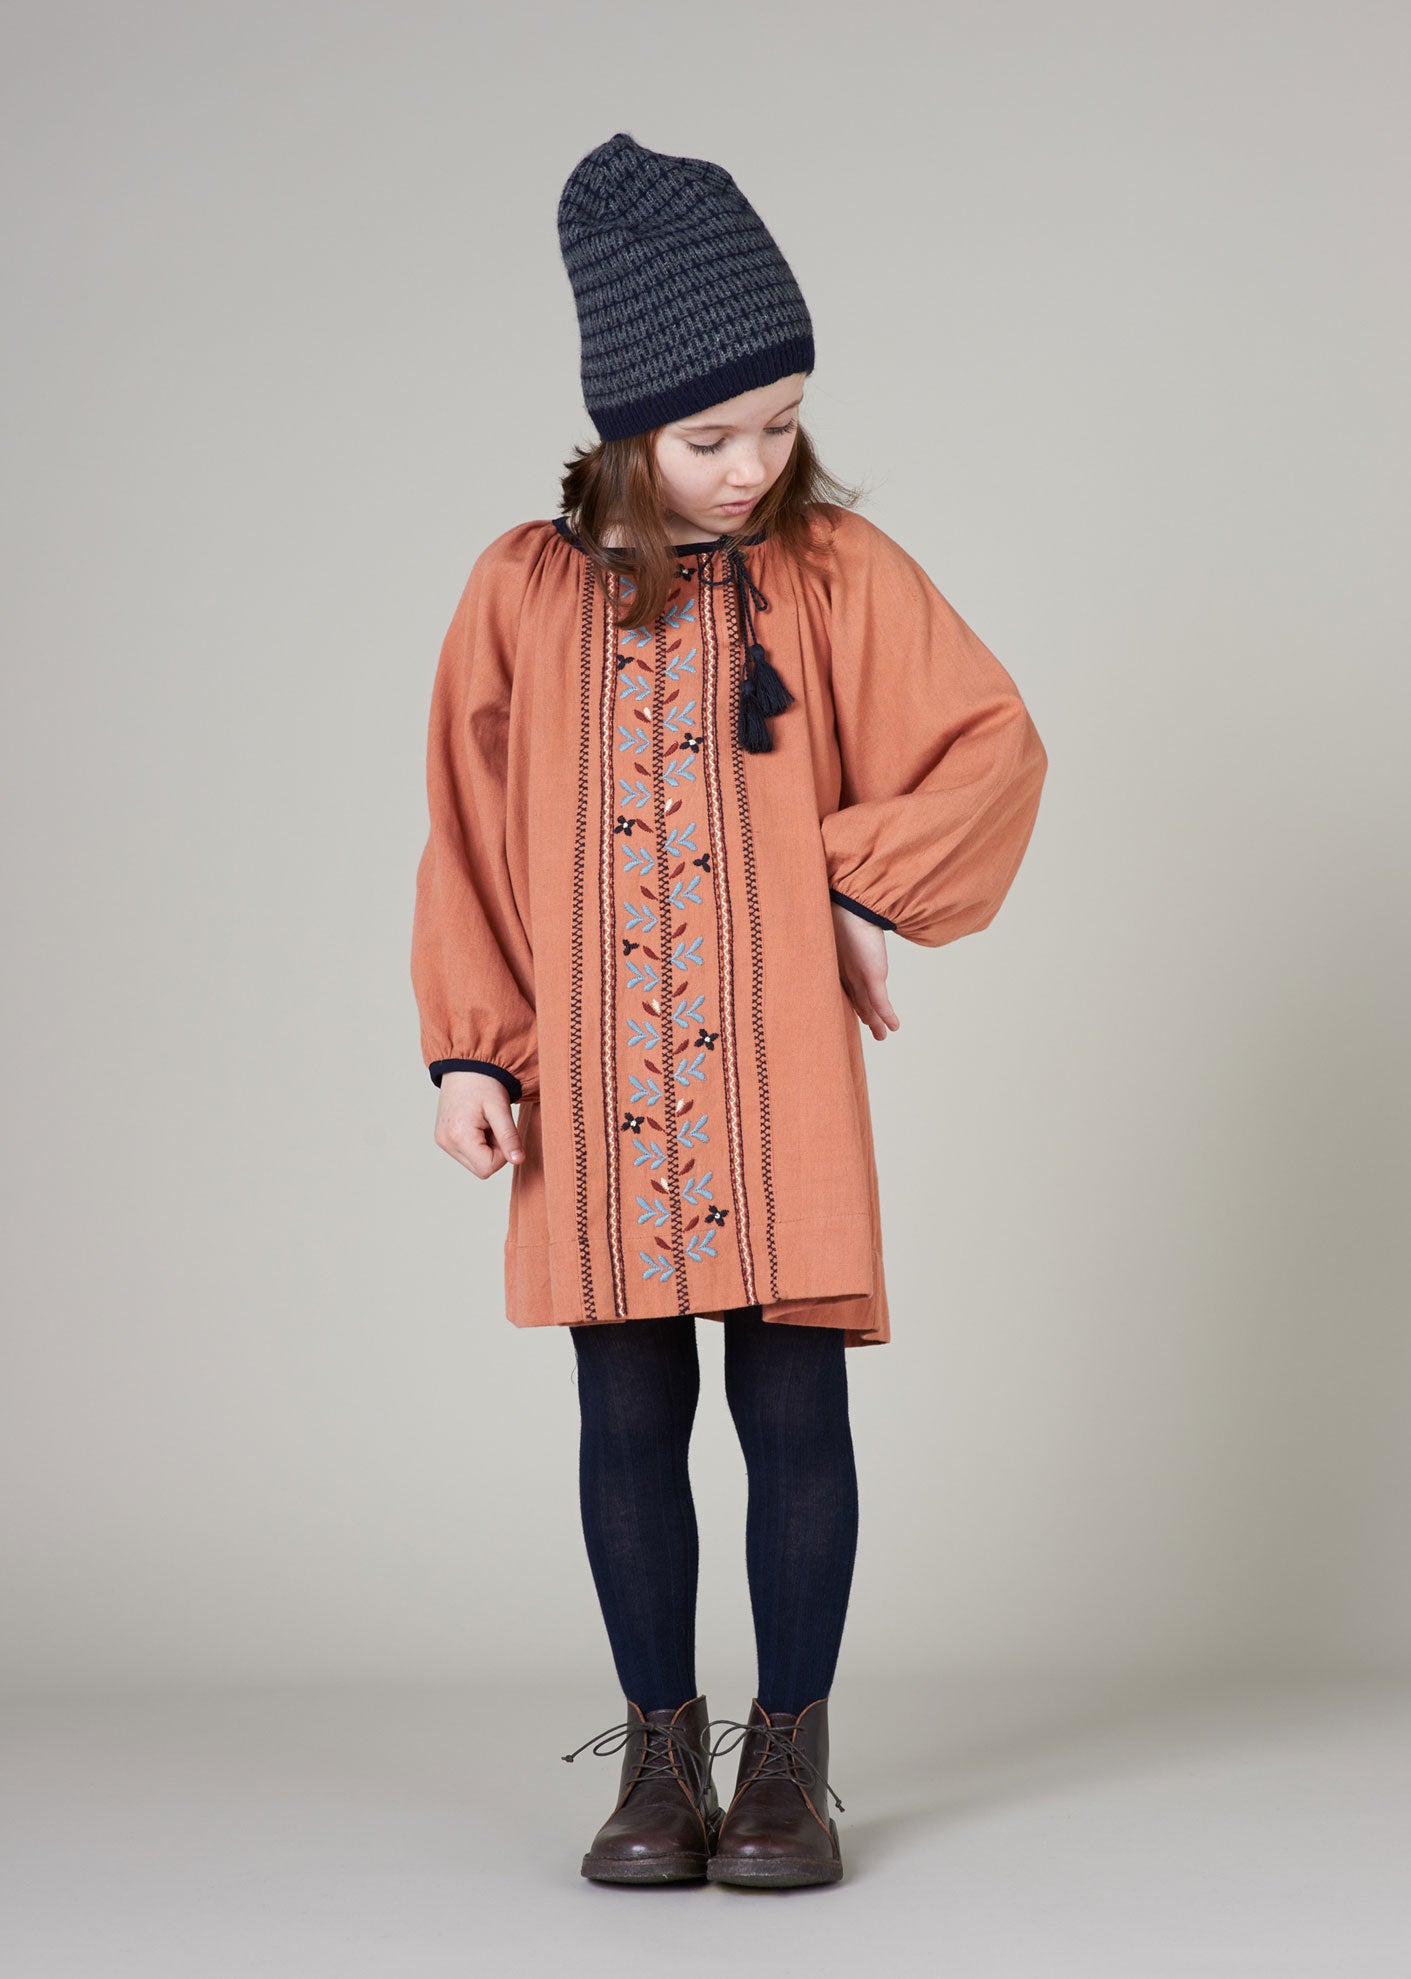 LYDFORD EMBROIDERY DRESS - PERSIMMON